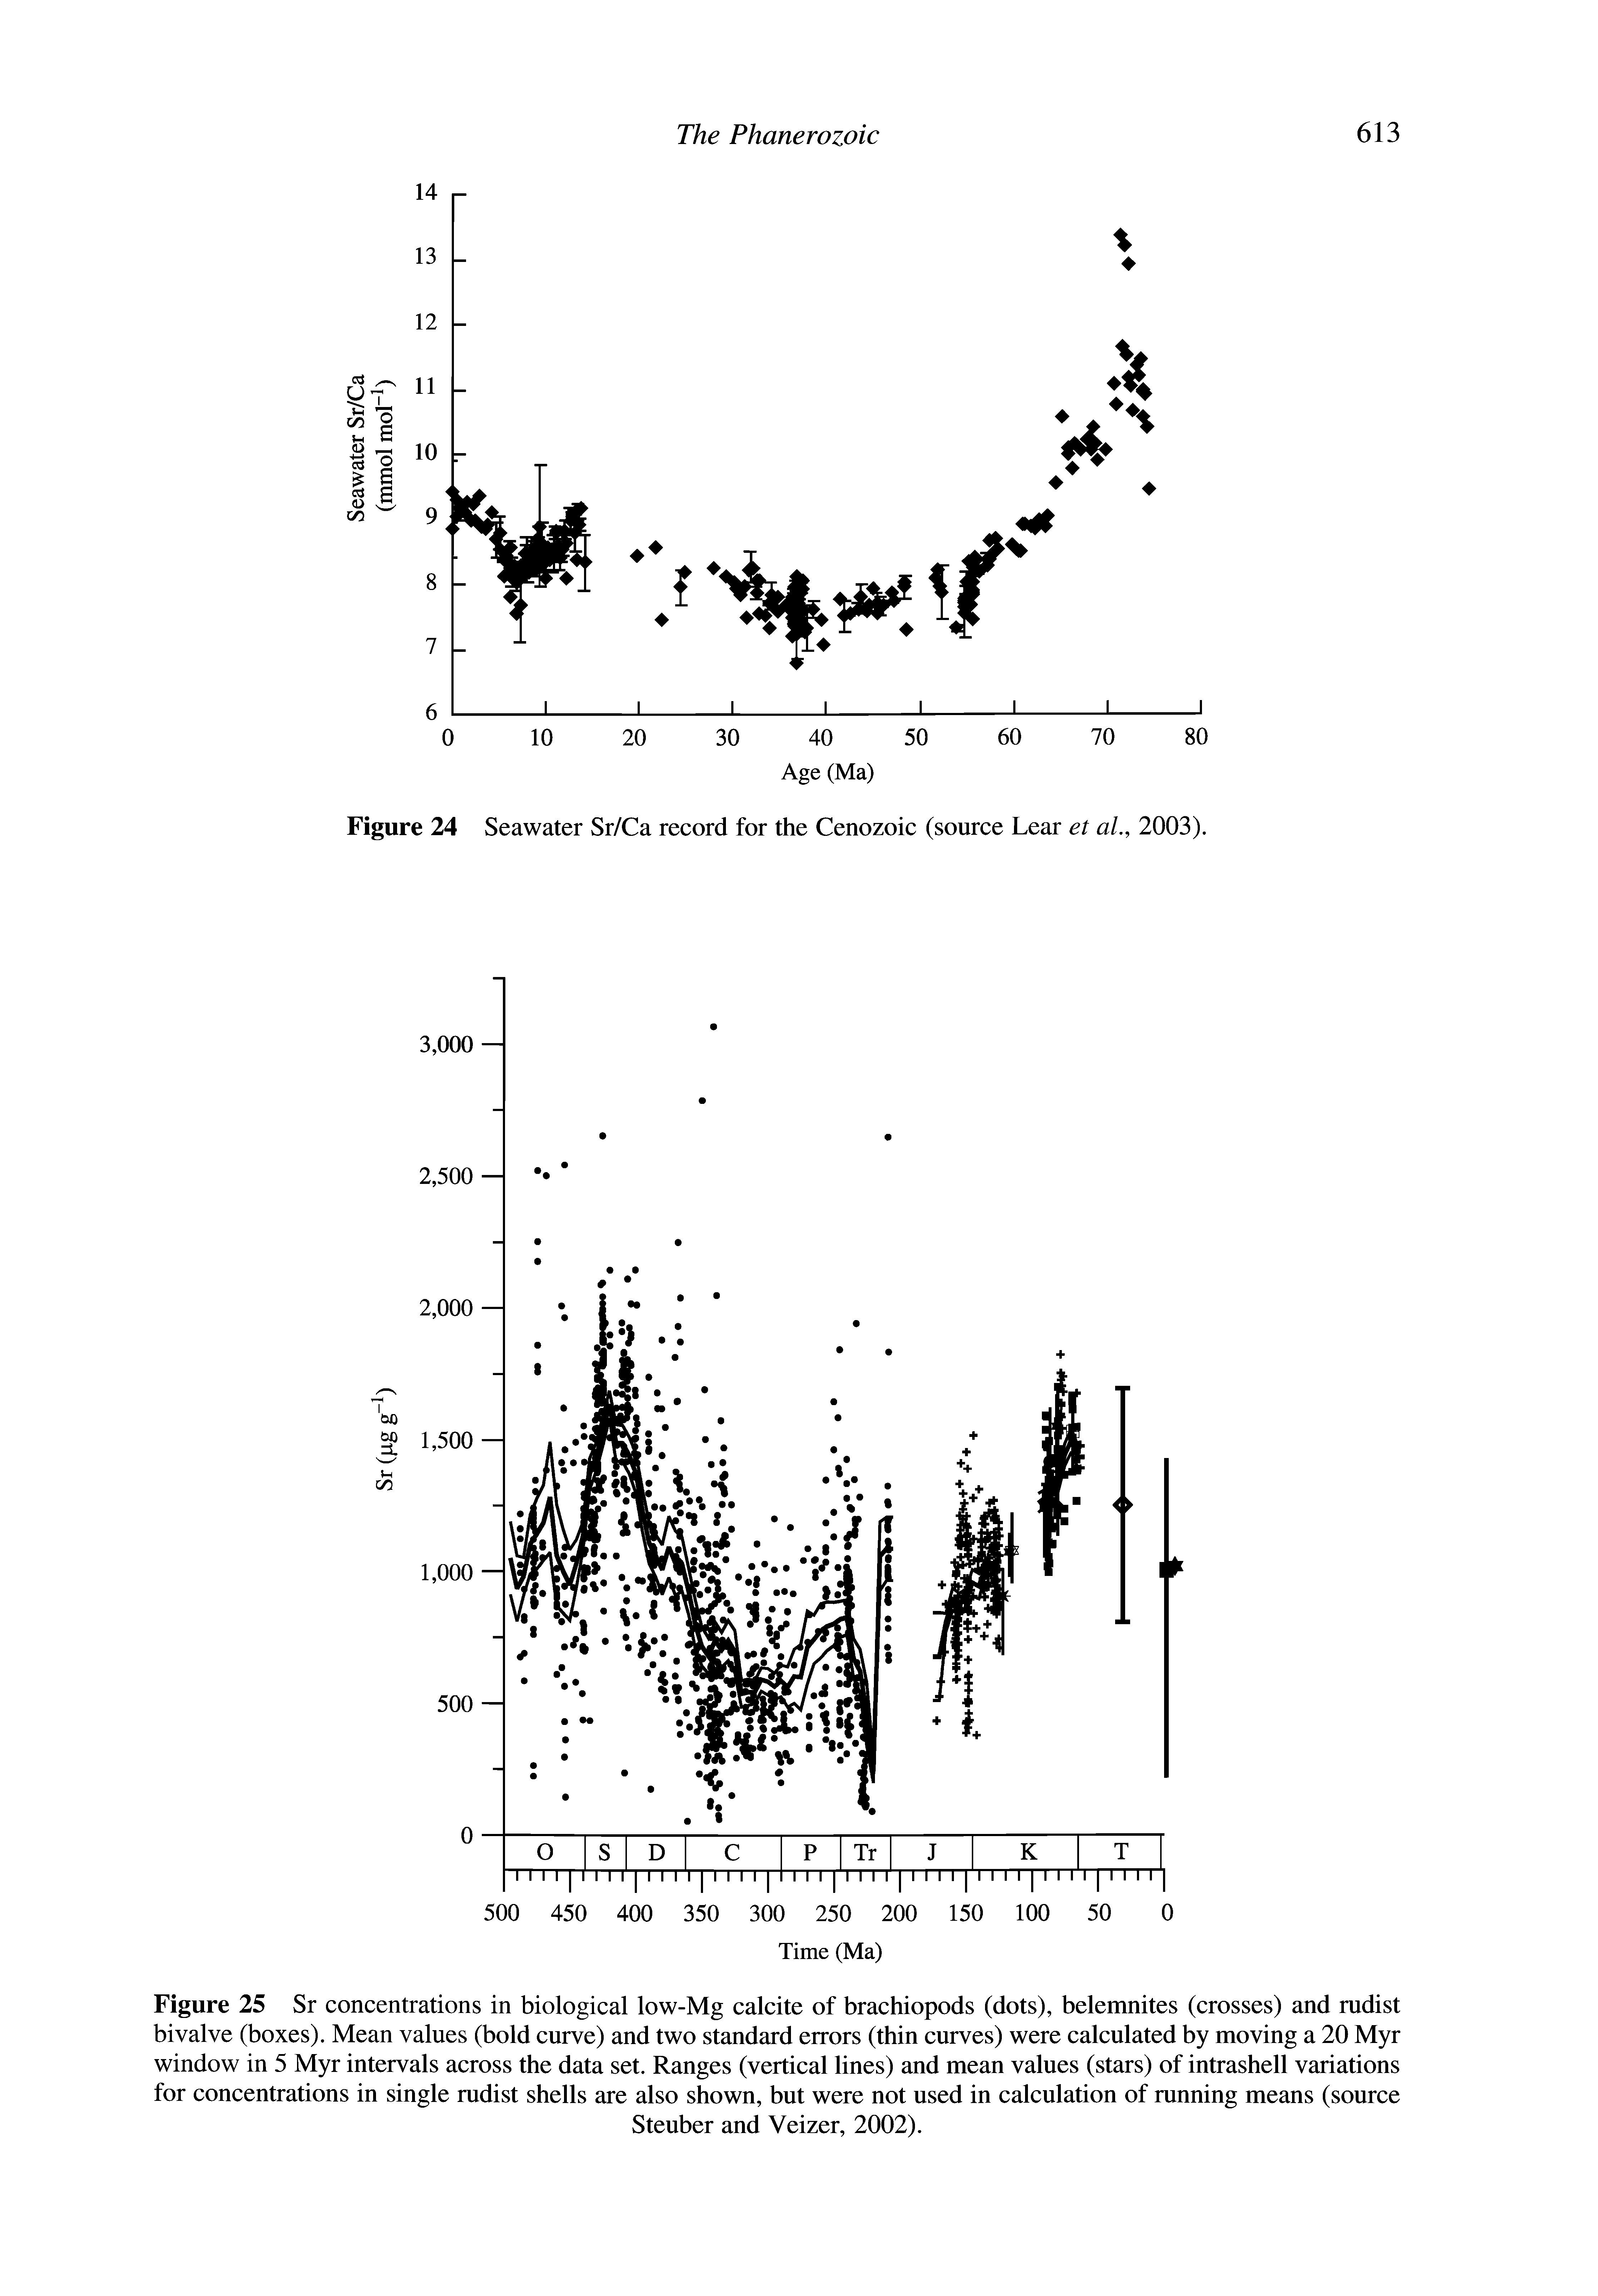 Figure 25 Sr concentrations in biological low-Mg calcite of brachiopods (dots), belemnites (crosses) and rudist bivalve (boxes). Mean values (bold curve) and two standard errors (thin curves) were calculated by moving a 20 Myr window in 5 Myr intervals across the data set. Ranges (vertical lines) and mean values (stars) of intrashell variations for concentrations in single rudist shells are also shown, but were not used in calculation of running means (source...